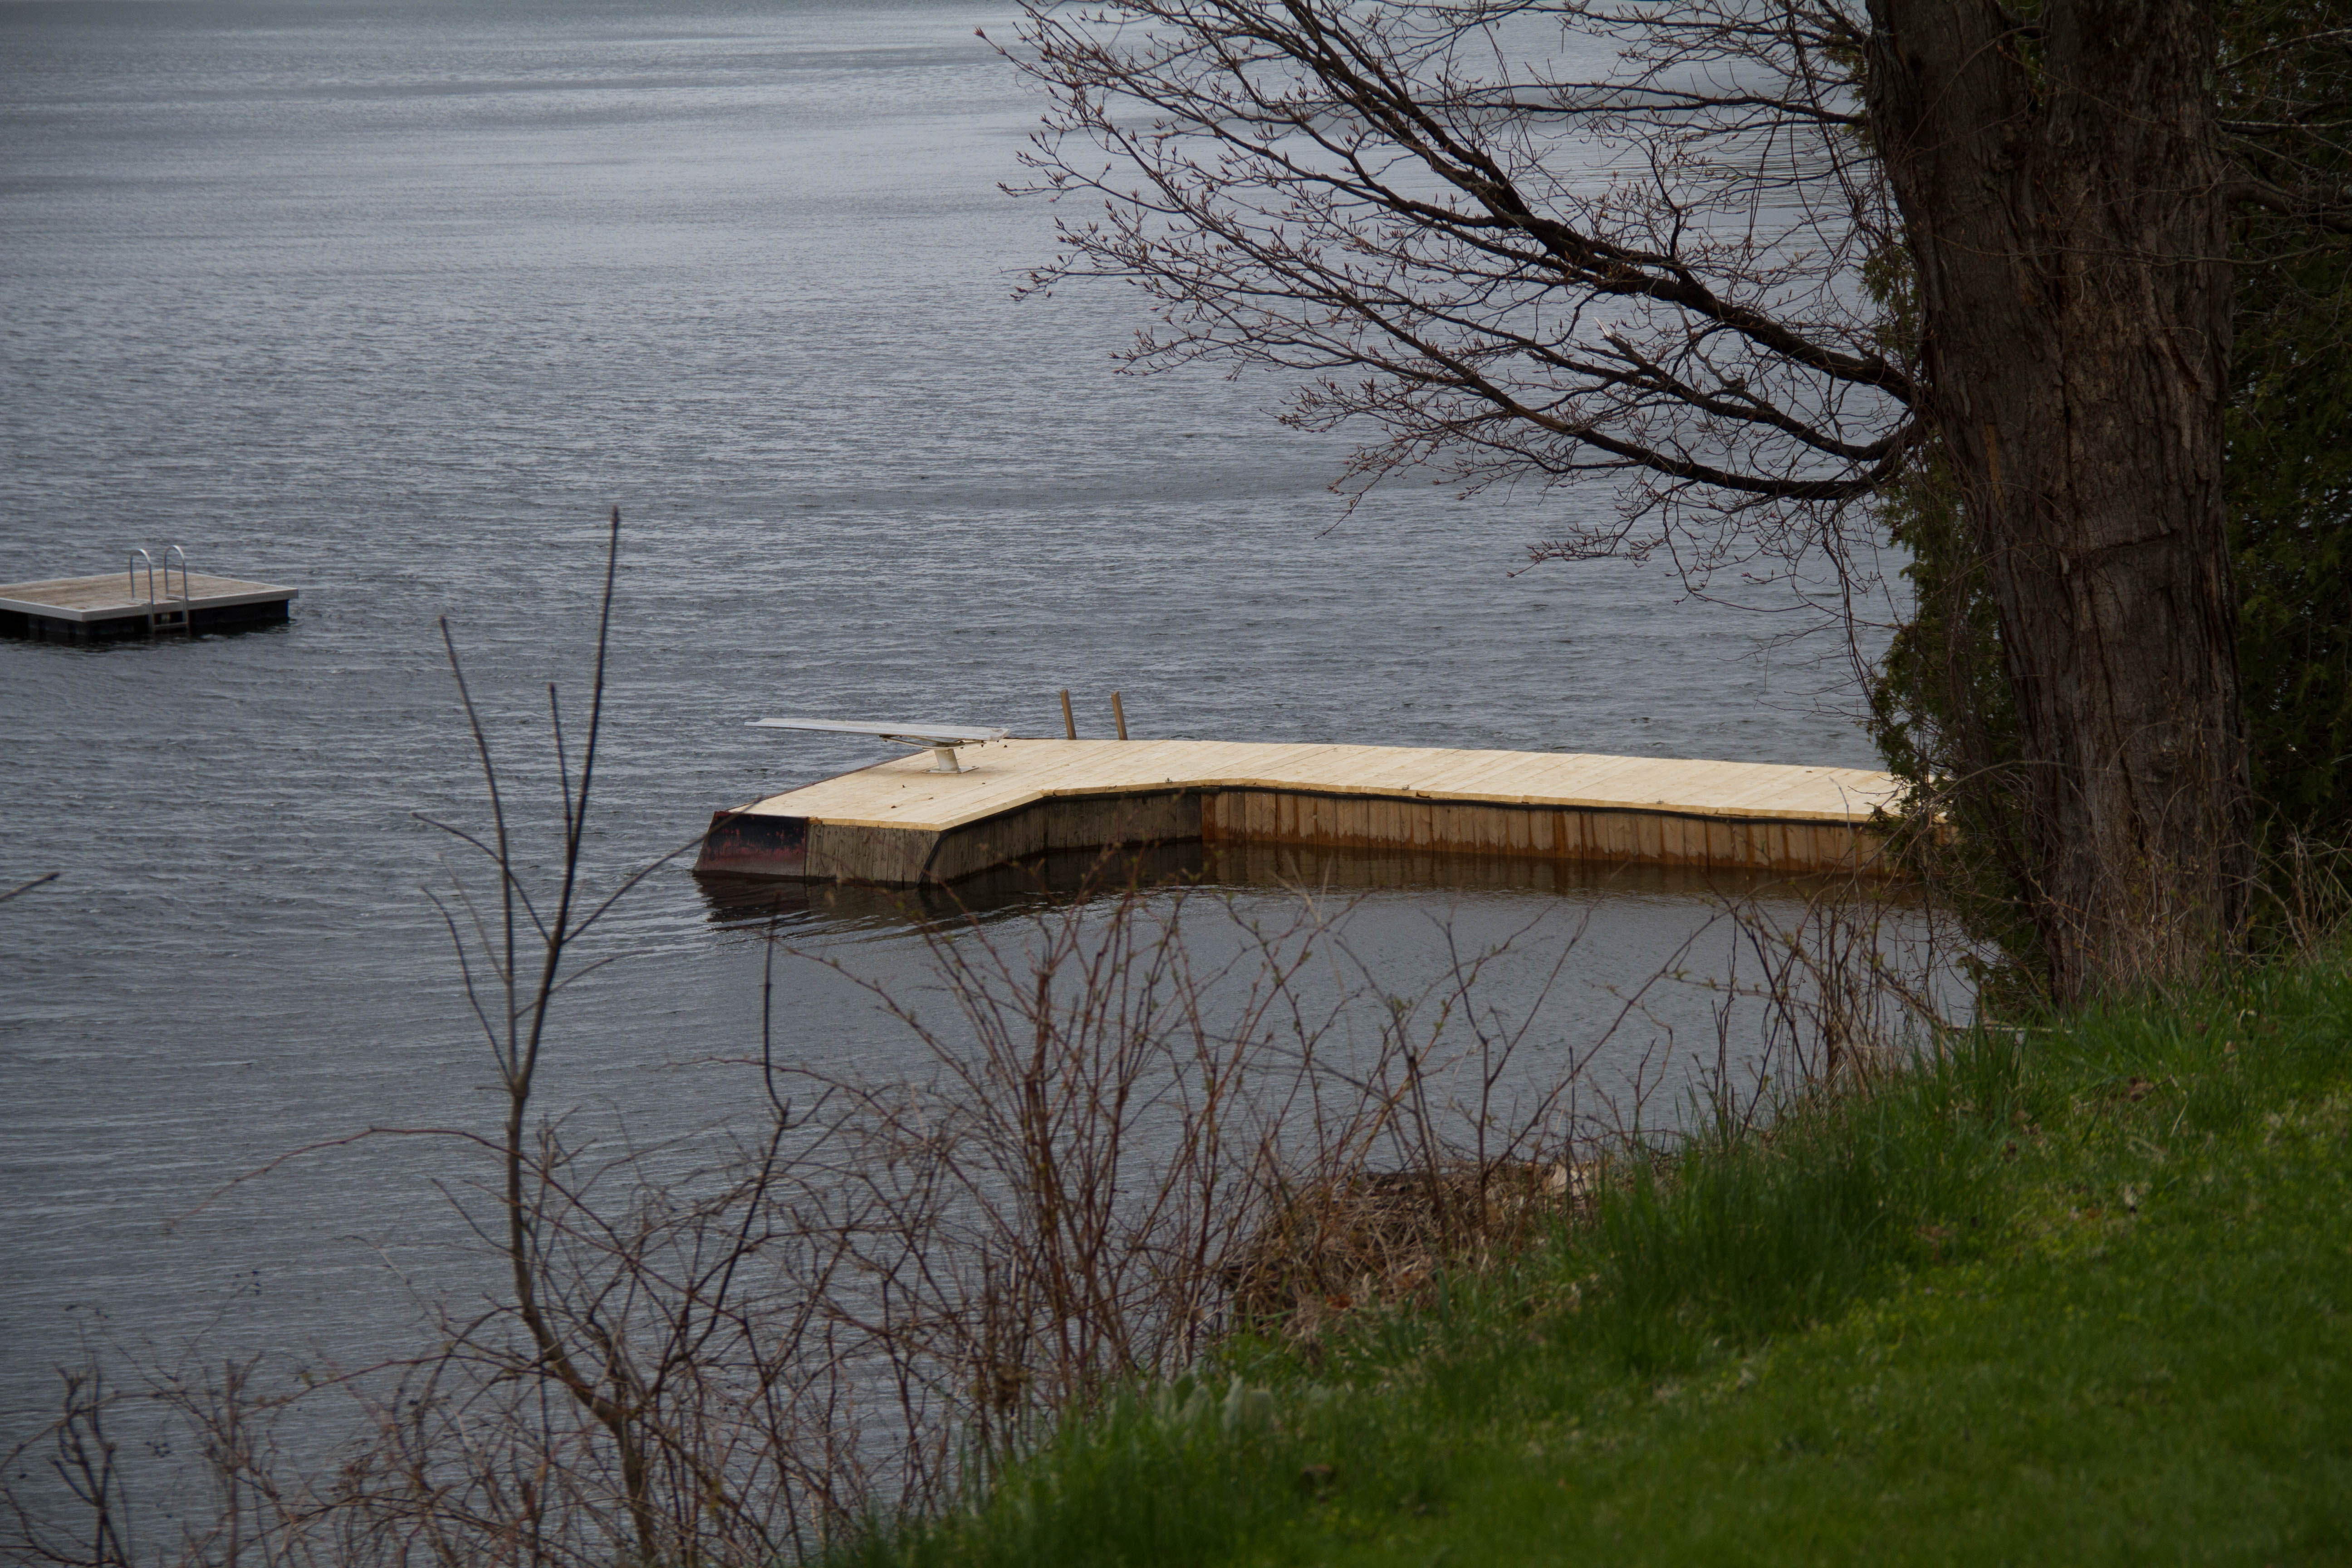 A brand new dock, ready for summer.